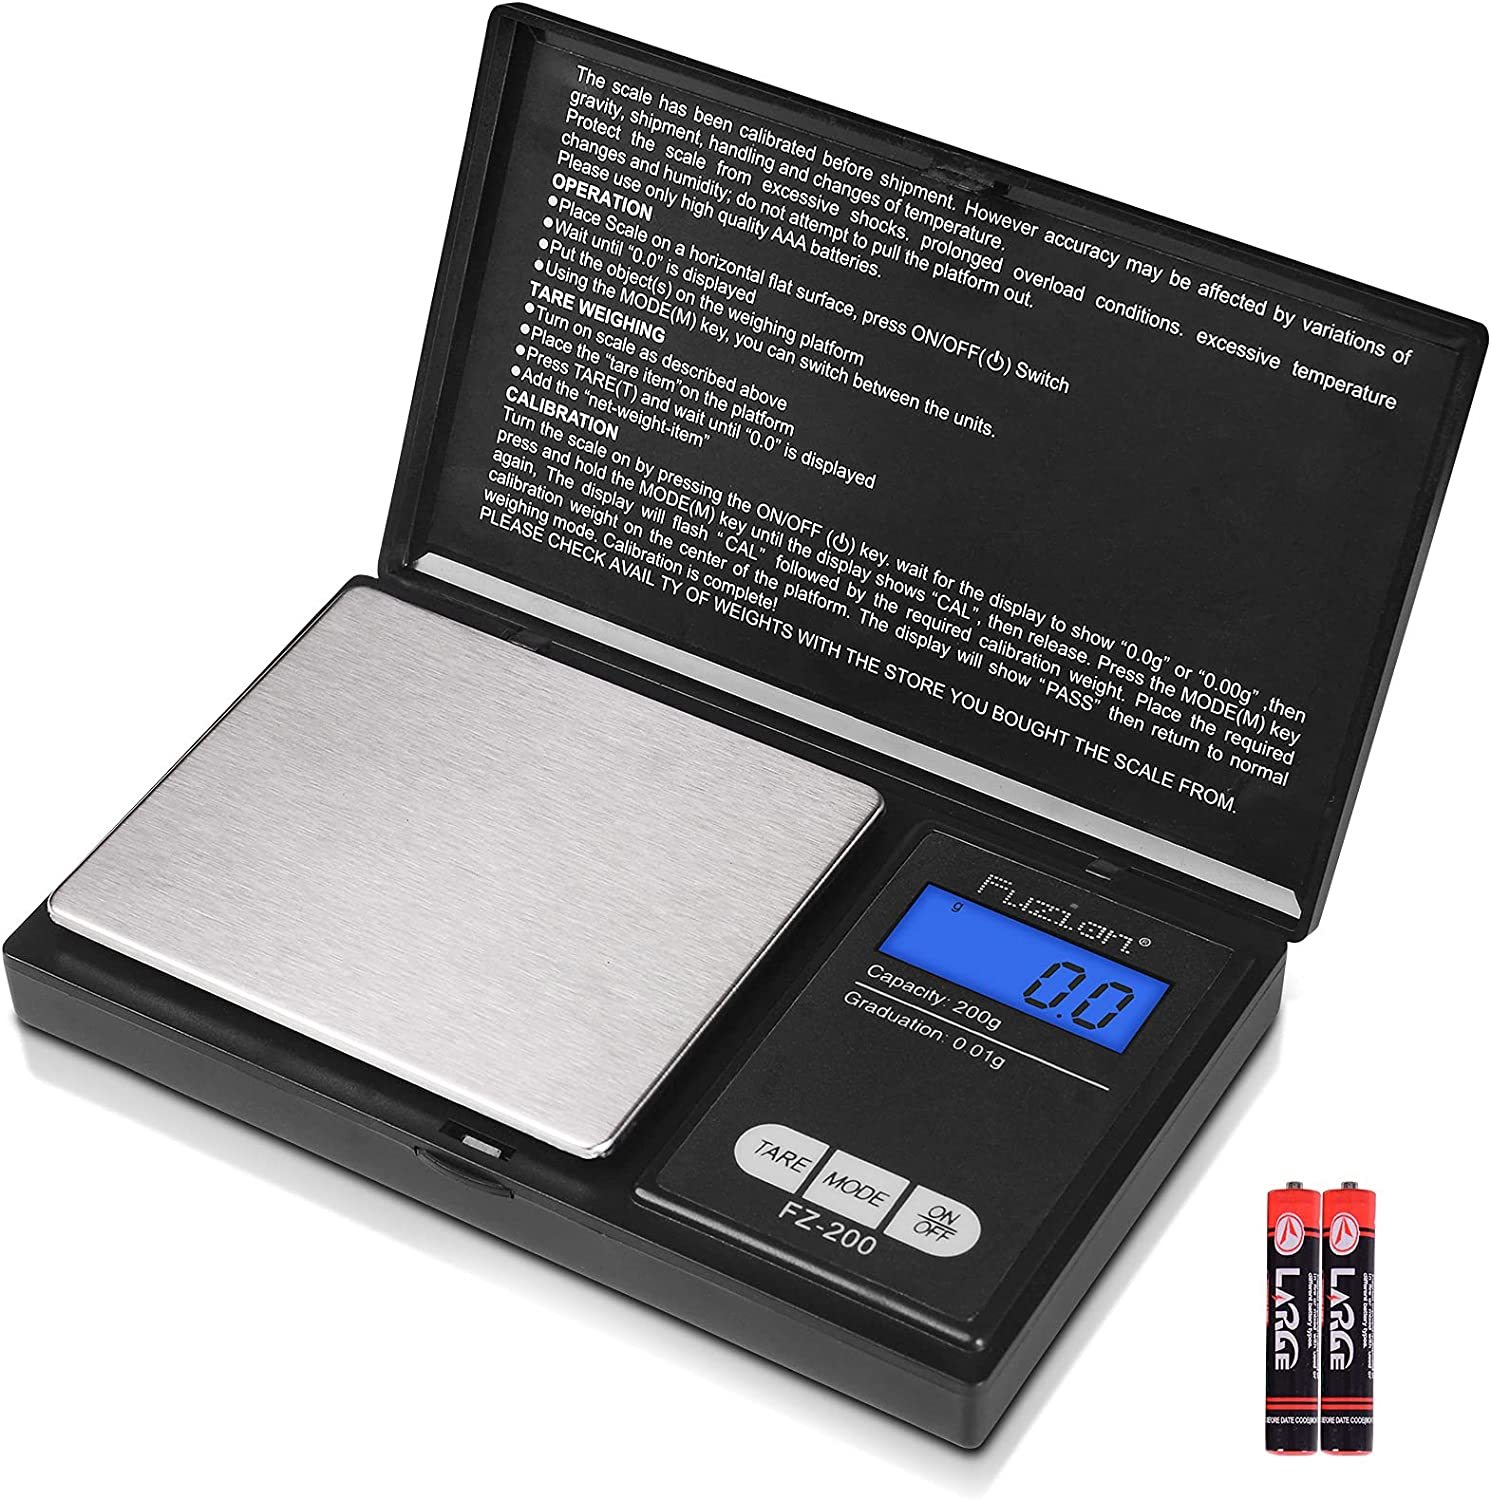 AMW-2000 COMPACT DIGITAL BENCH SCALE, 2000 X 0.1G - American Weigh Scales